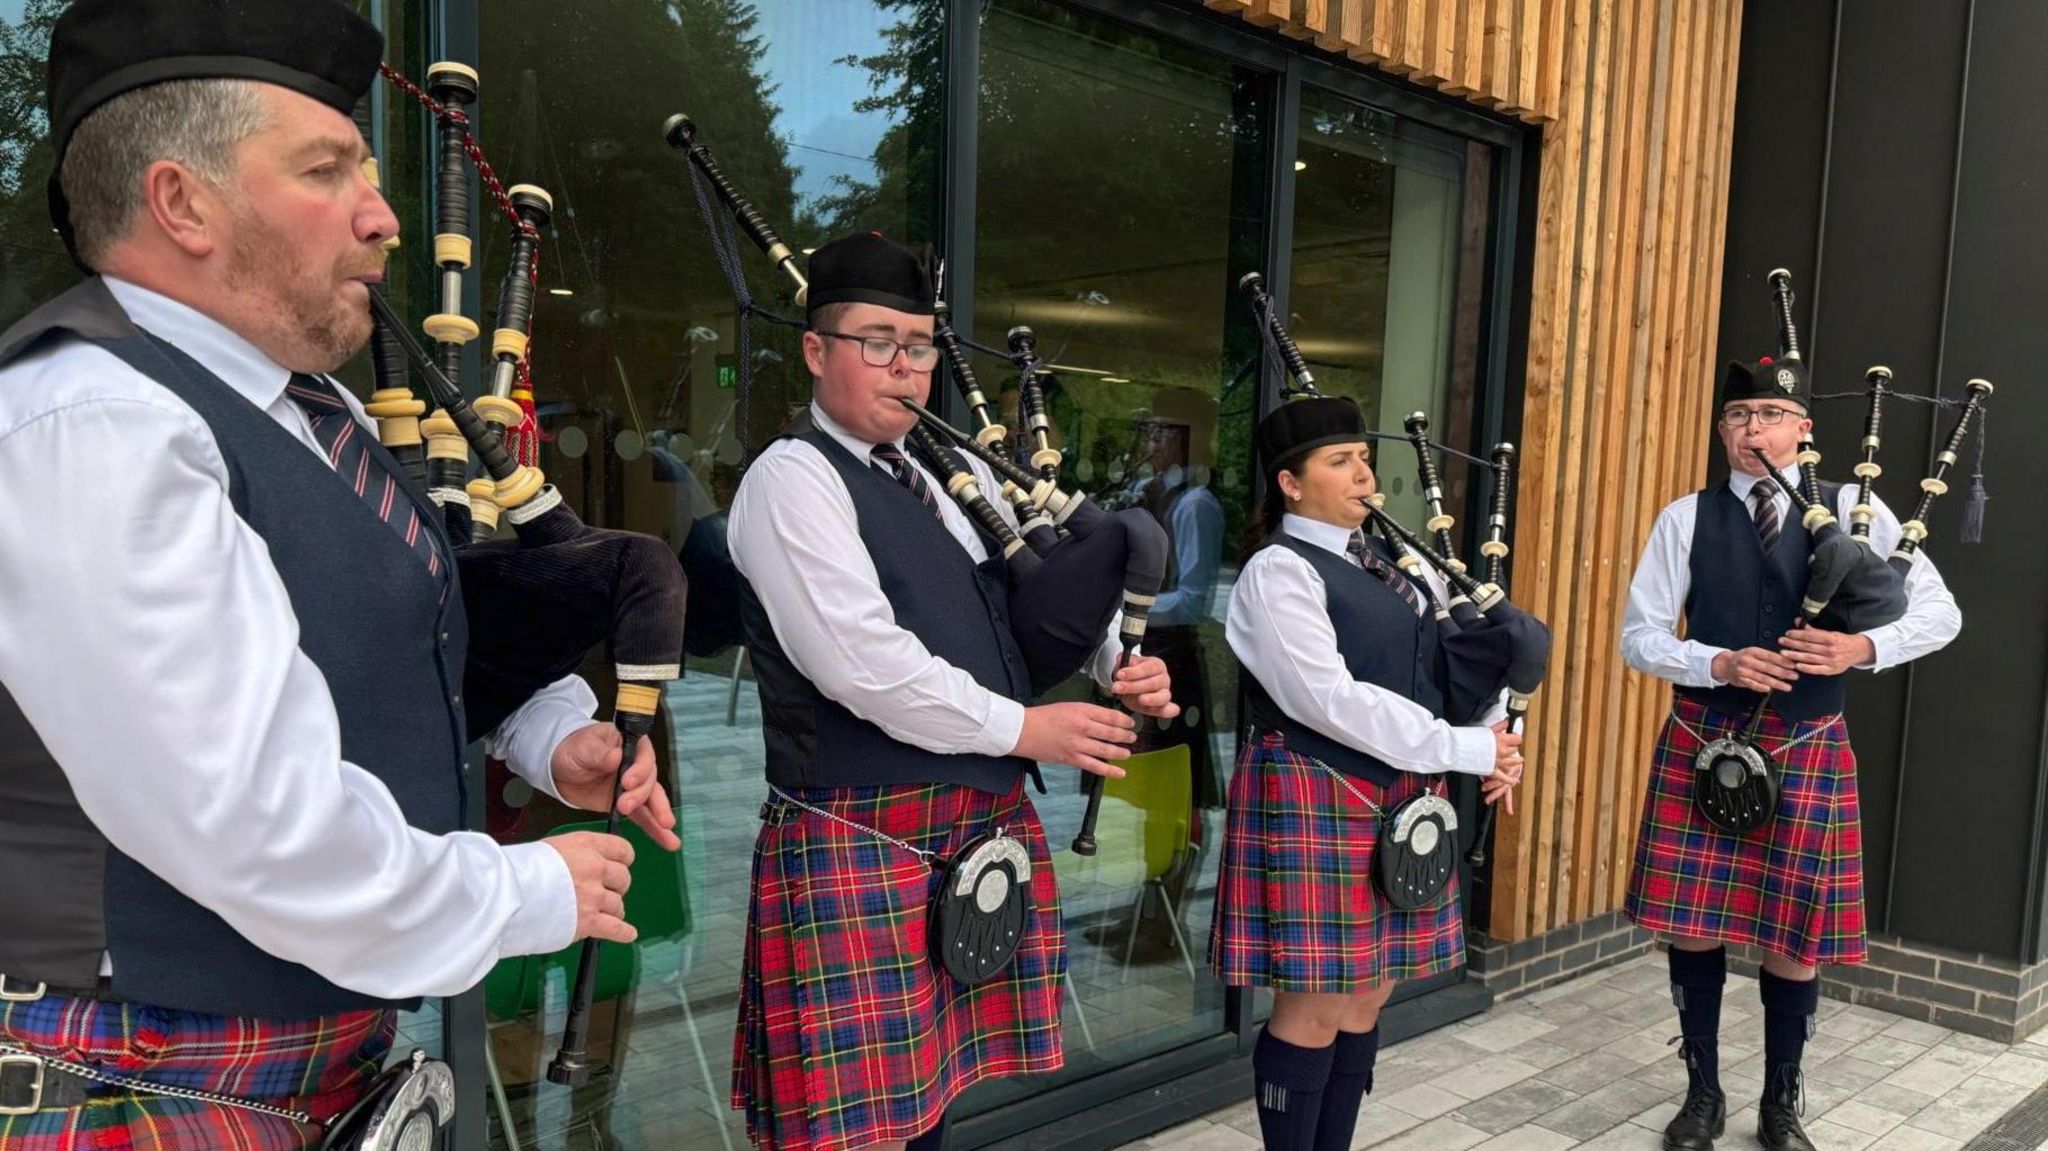 Members of the band played as guests arrived at a recent event in Pomeroy